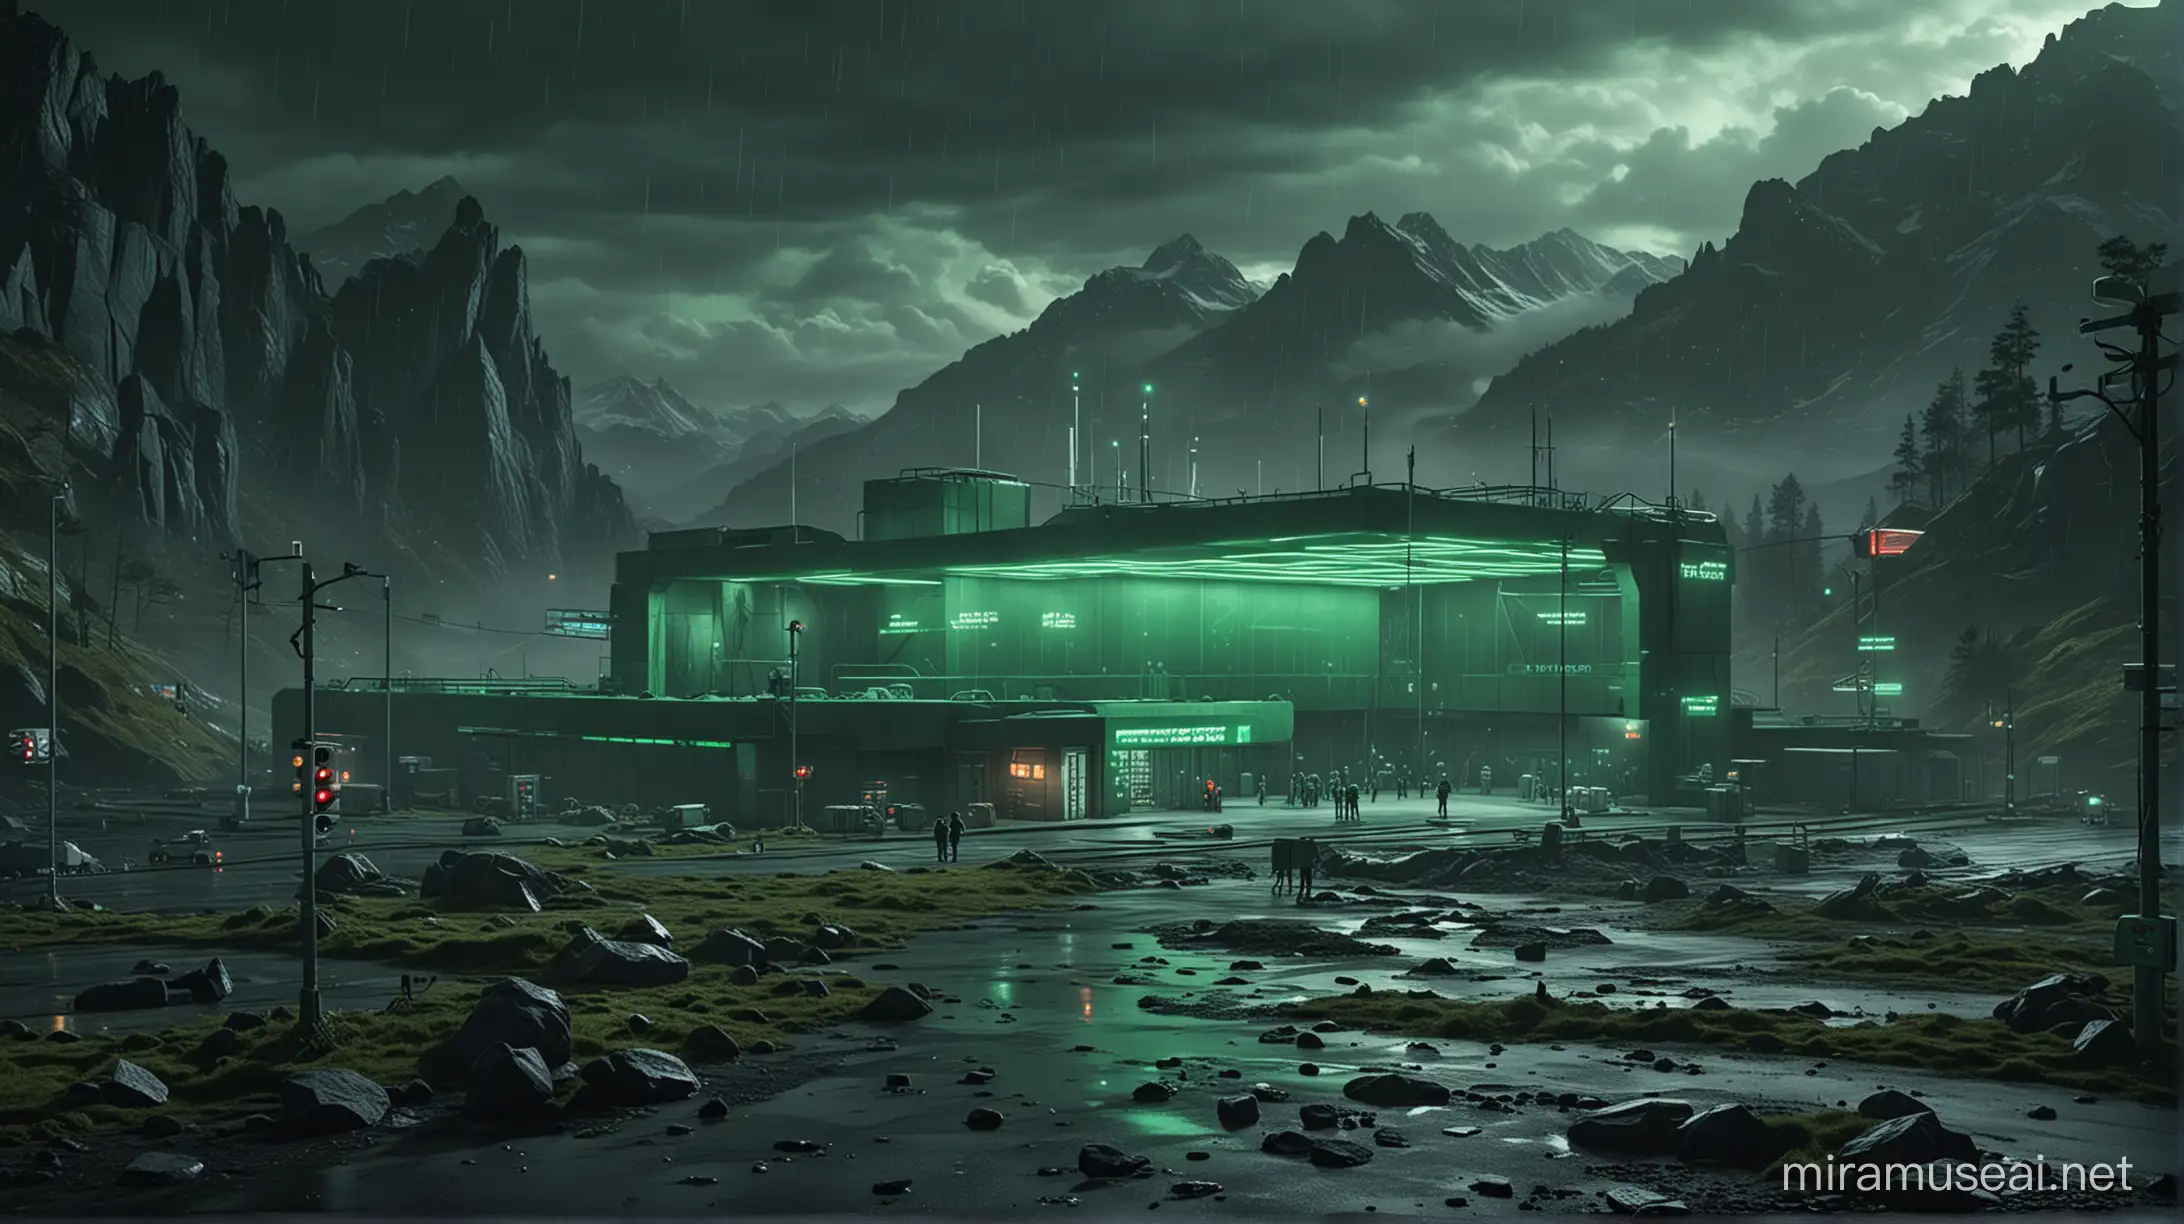 Futuristic Research Center Amidst Enigmatic Green Neon Glow in Rainy Atmosphere